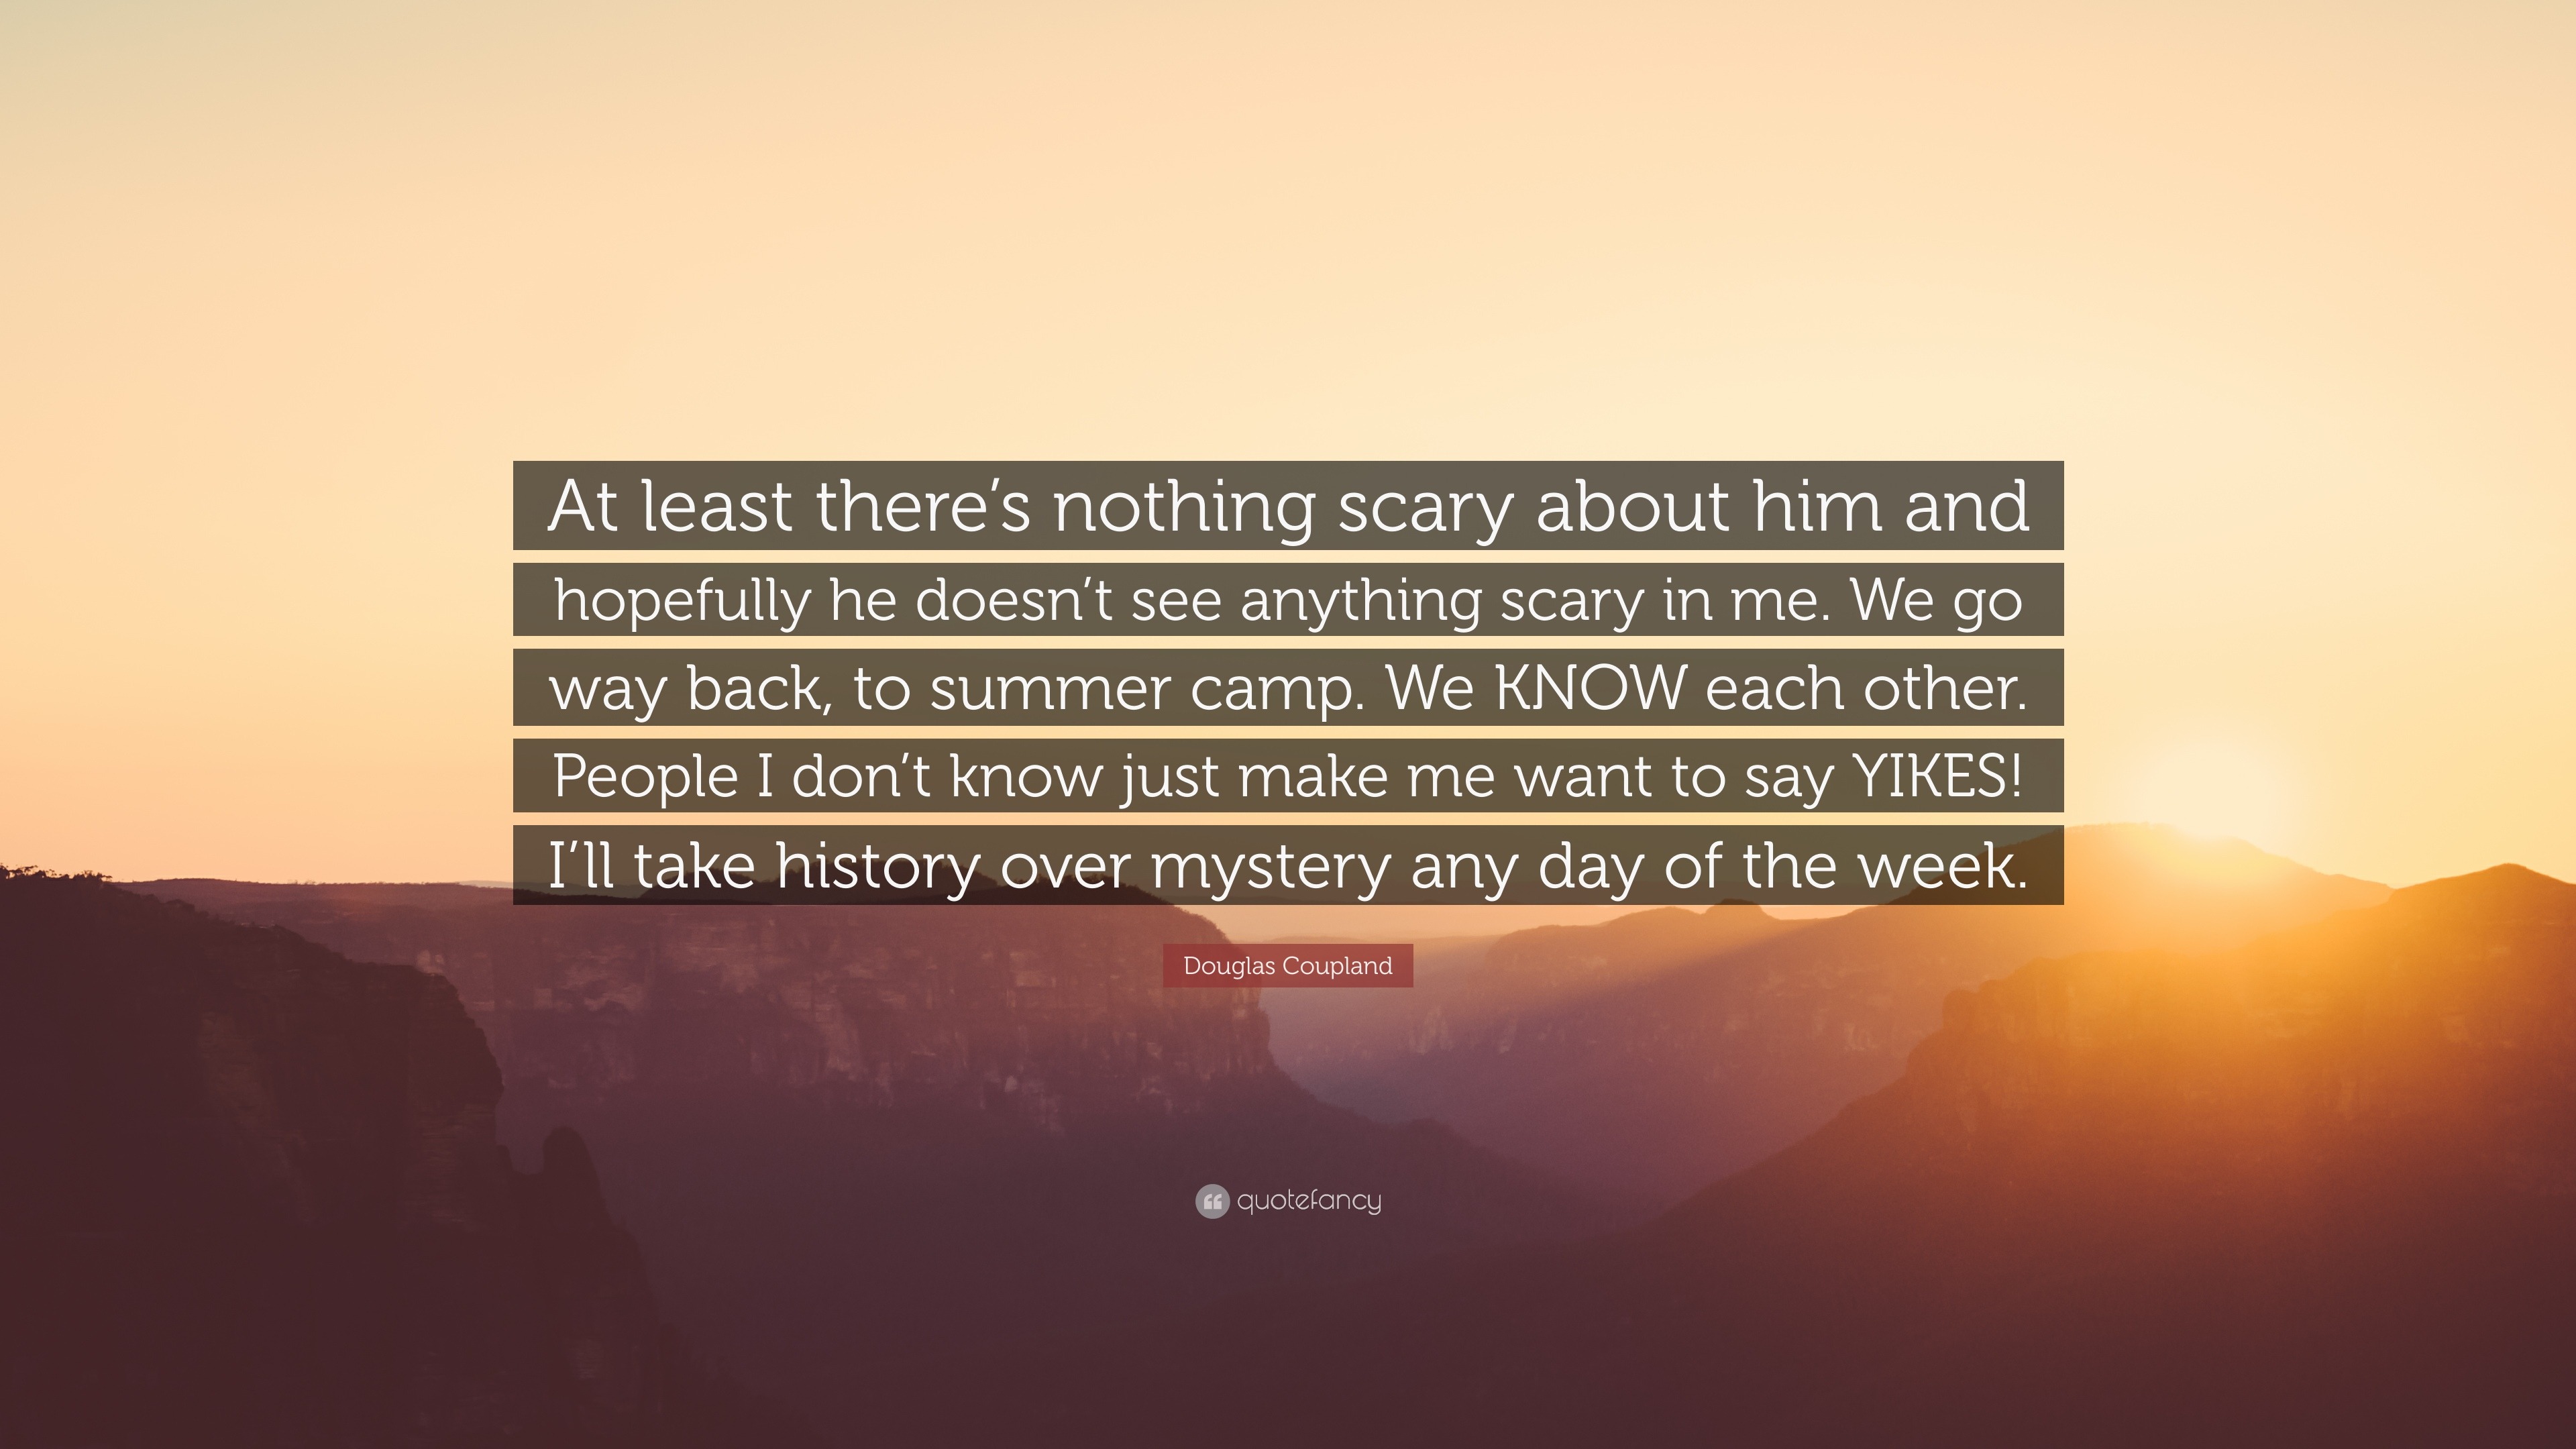 Douglas Coupland Quote At Least There S Nothing Scary About Him And Hopefully He Doesn T See Anything Scary In Me We Go Way Back To Summer Ca